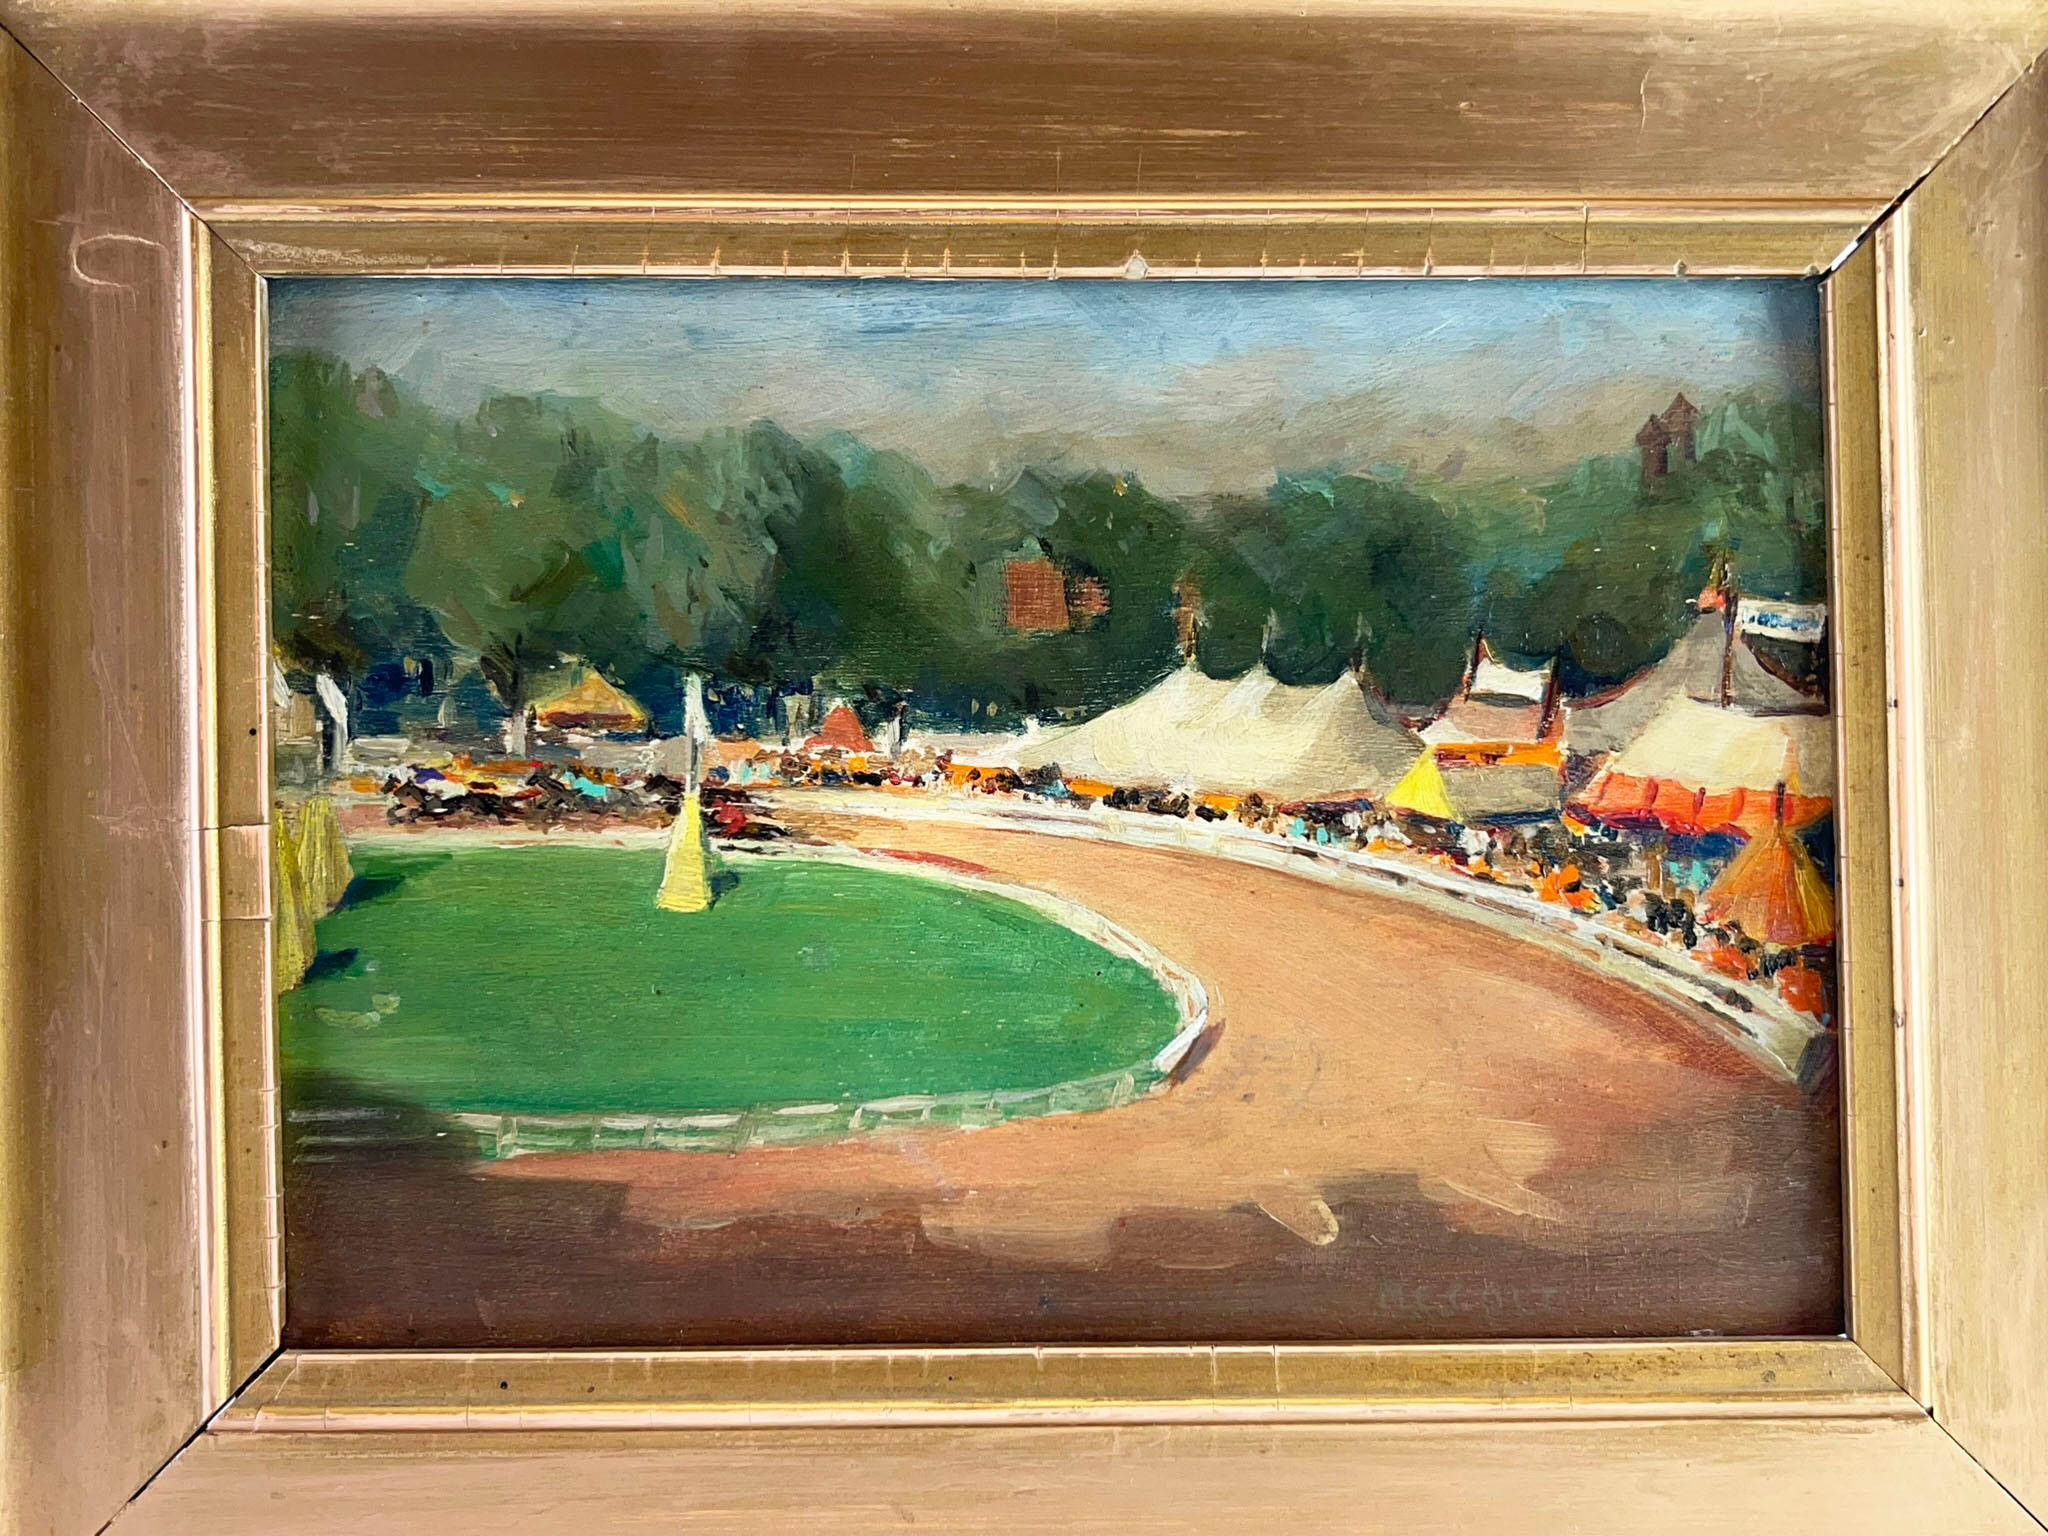 An impressionist painting of a horse race by a founding member of the New Hope Group of painters, Morgan Colt. Colt was a member of the gun making family and was also known as a metalworker in the arts and crafts style of the early 20th century. He